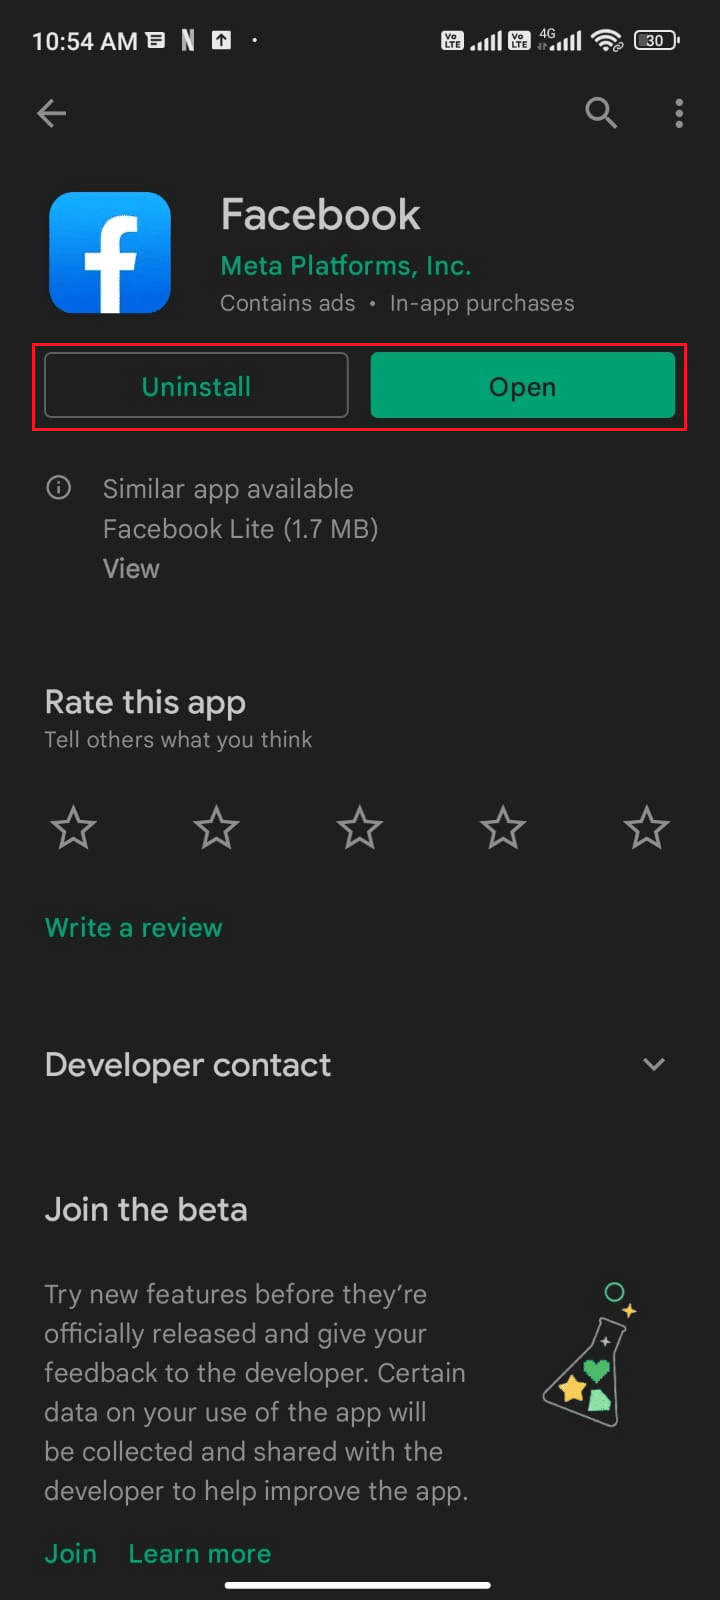 If your app is already updated you will see only the Open and Uninstall options